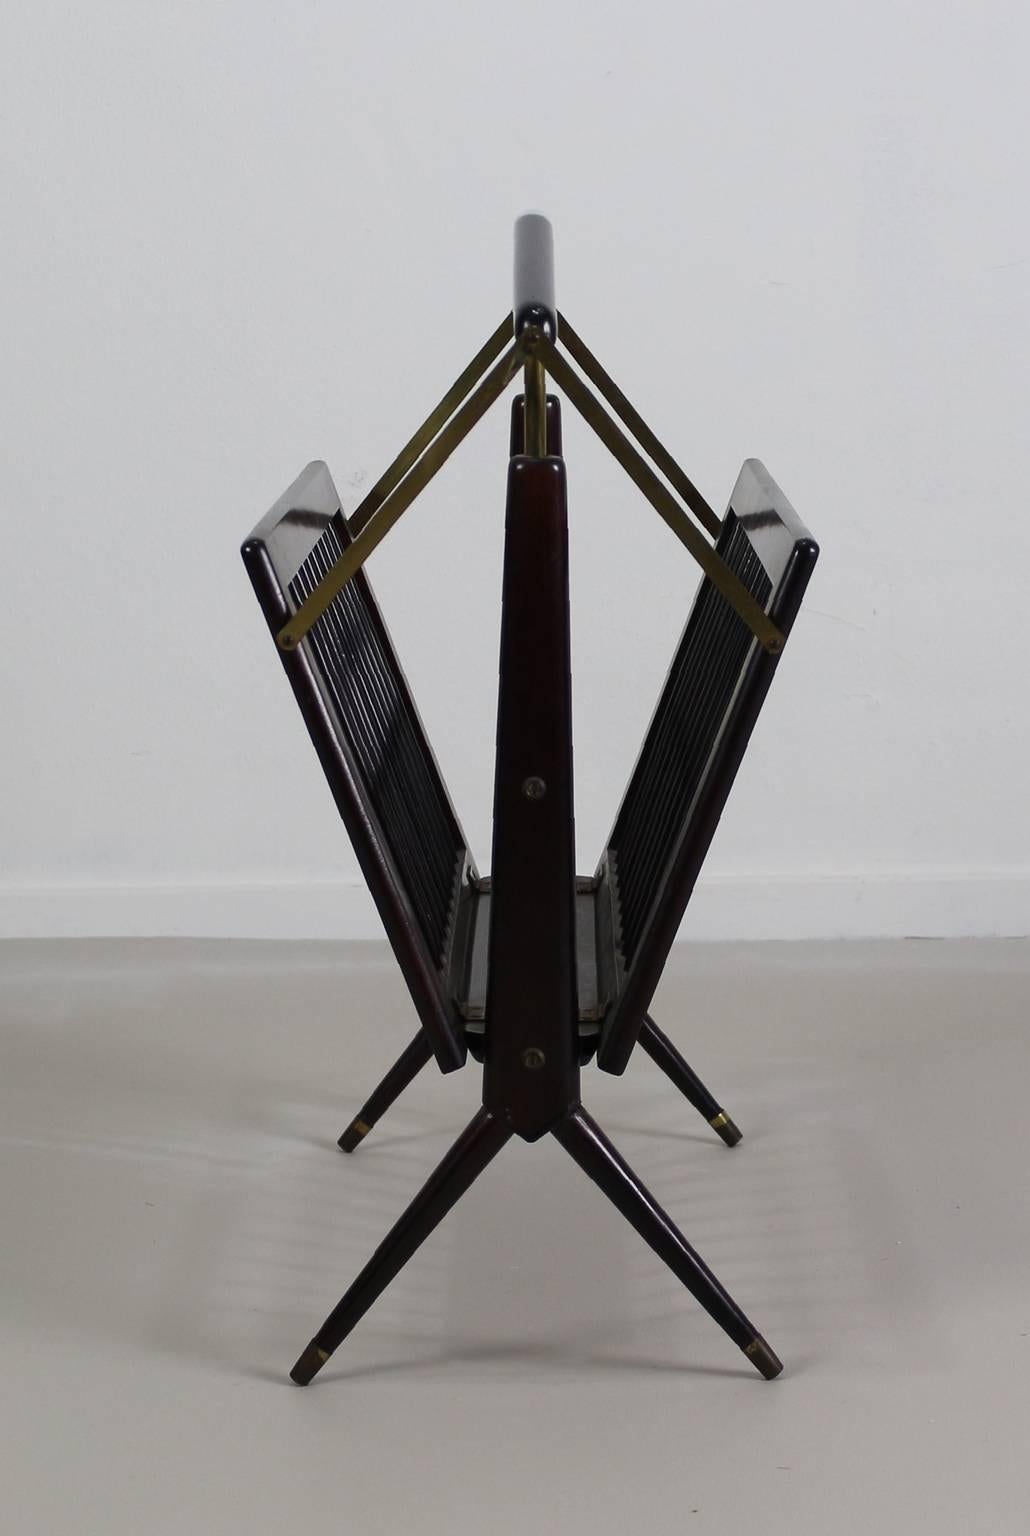 Very elegant magazine stand from the 1950s.
In the style of Gio Ponti / Ico Parisi Italian manufacturing
brass elements with black lacquered walnut wood.